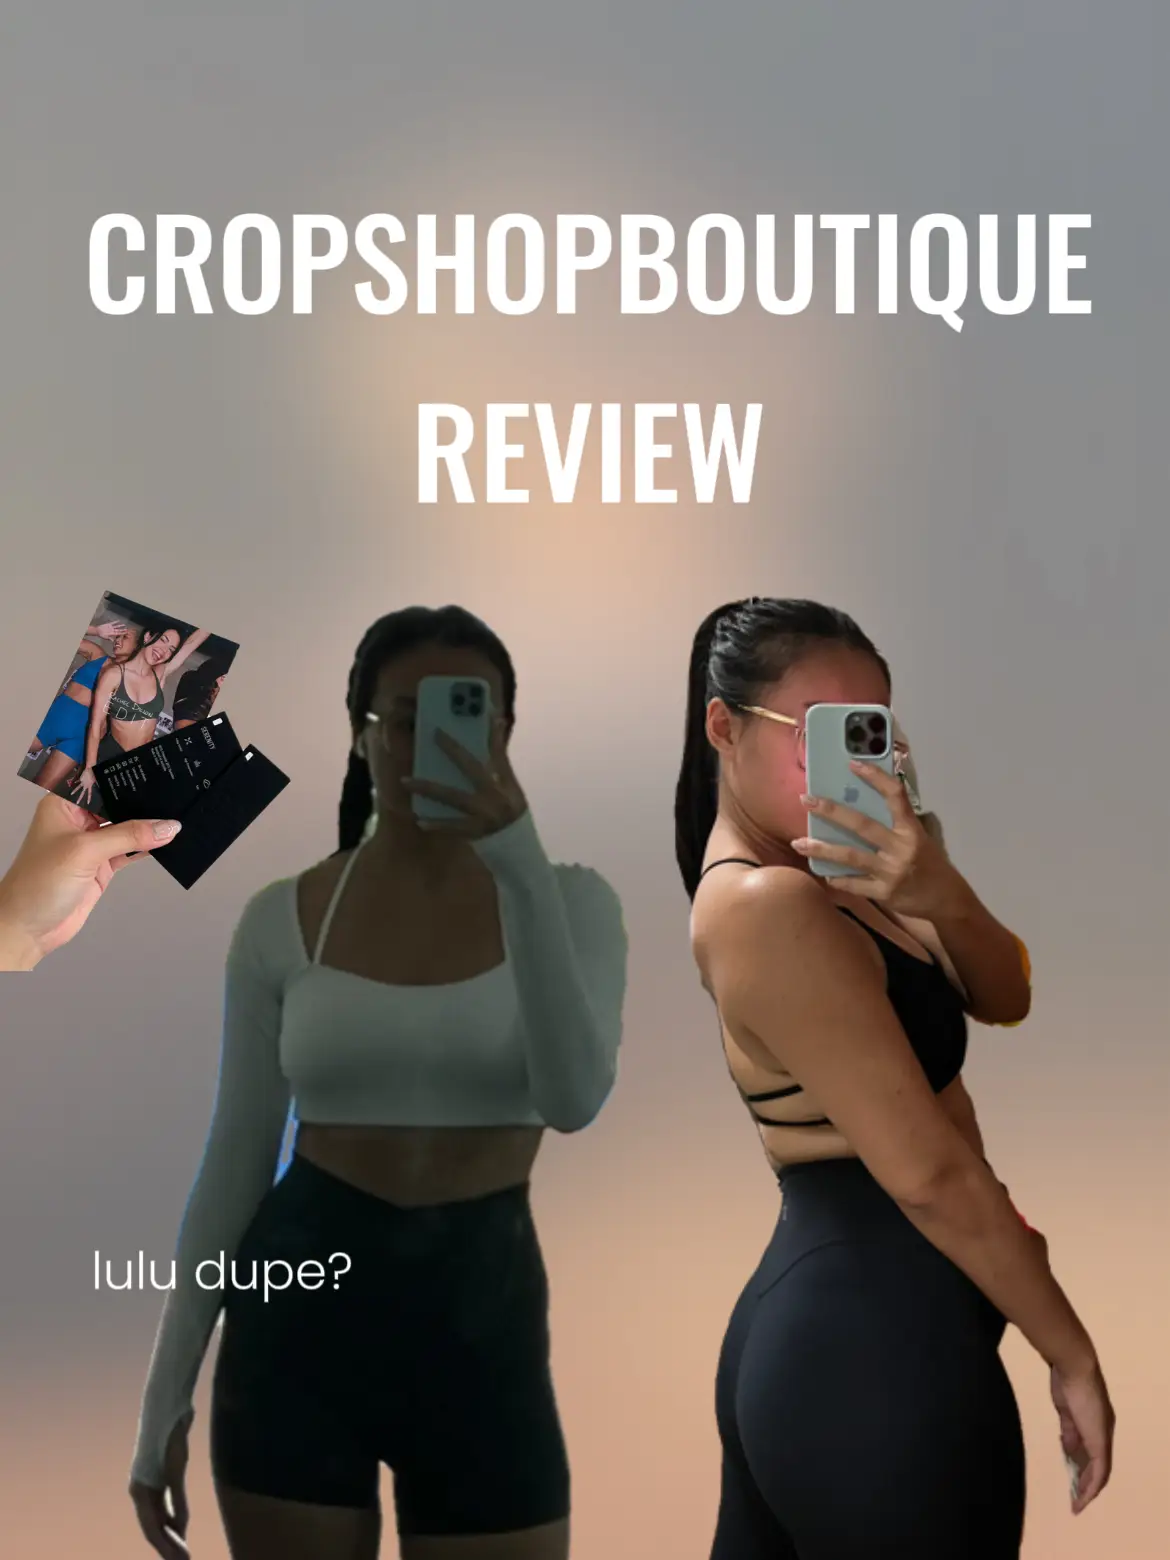 SHOPEE] Chio Toga Sports Bra Under $20!!!, Video published by nicolechowww